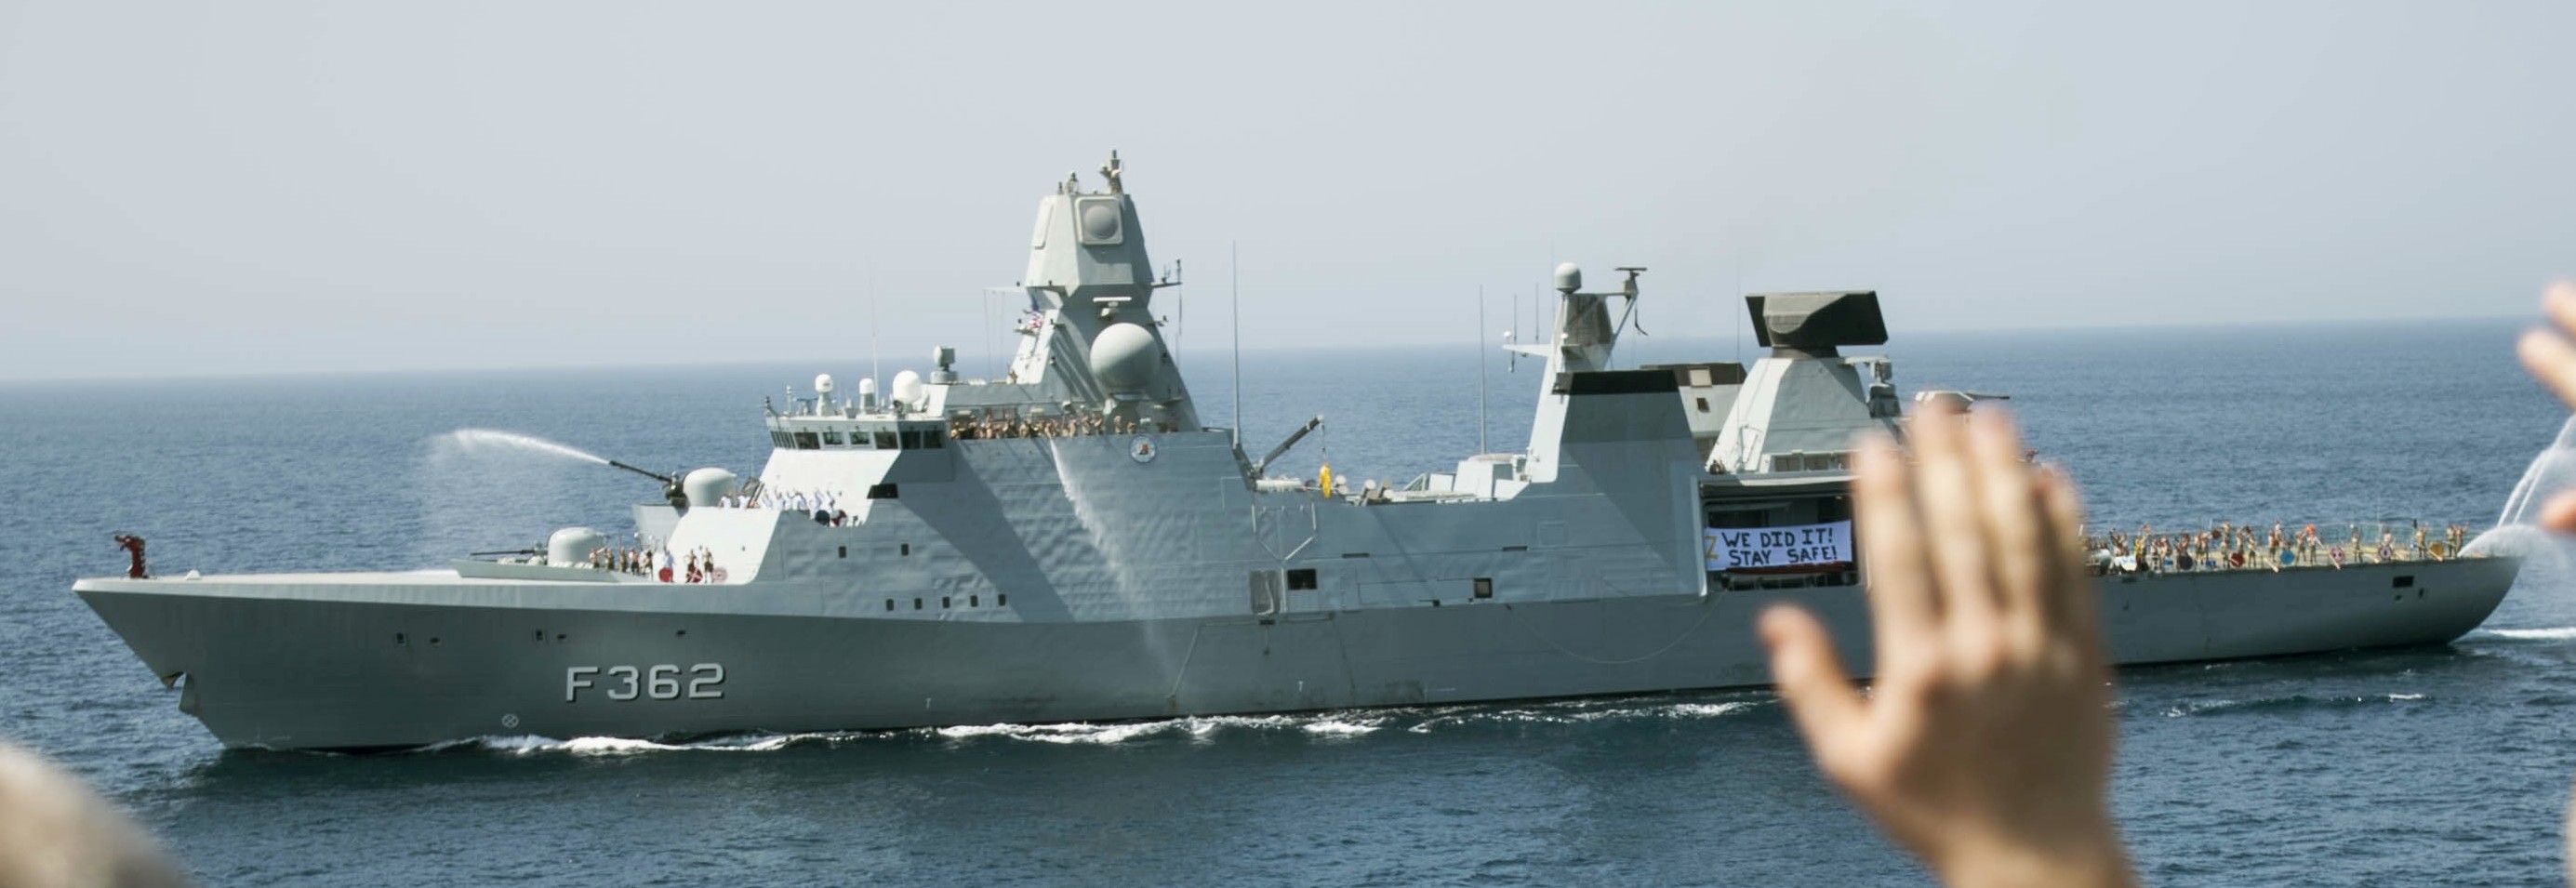 f-362 hdms peter willemoes iver huitfeldt class guided missile frigate ffg royal danish navy 13